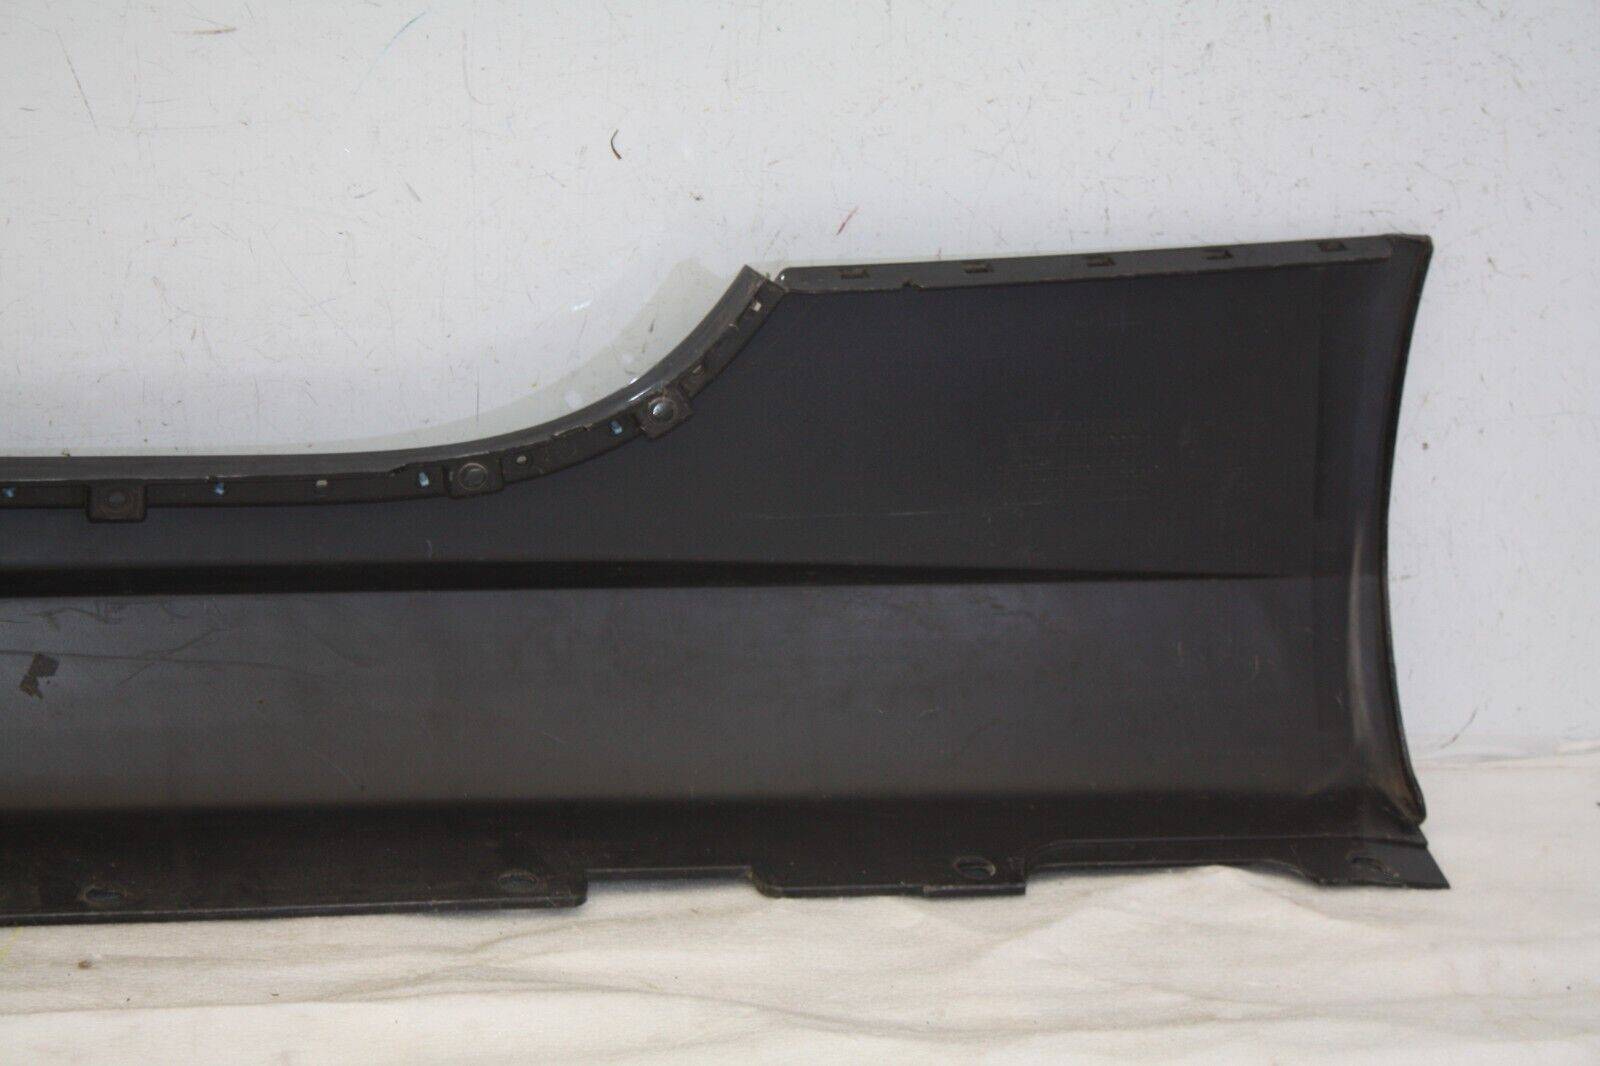 Jaguar-XK-Right-Side-Skirt-2006-TO-2009-6W83-10154-A-Genuine-SEE-PICS-176204486572-15